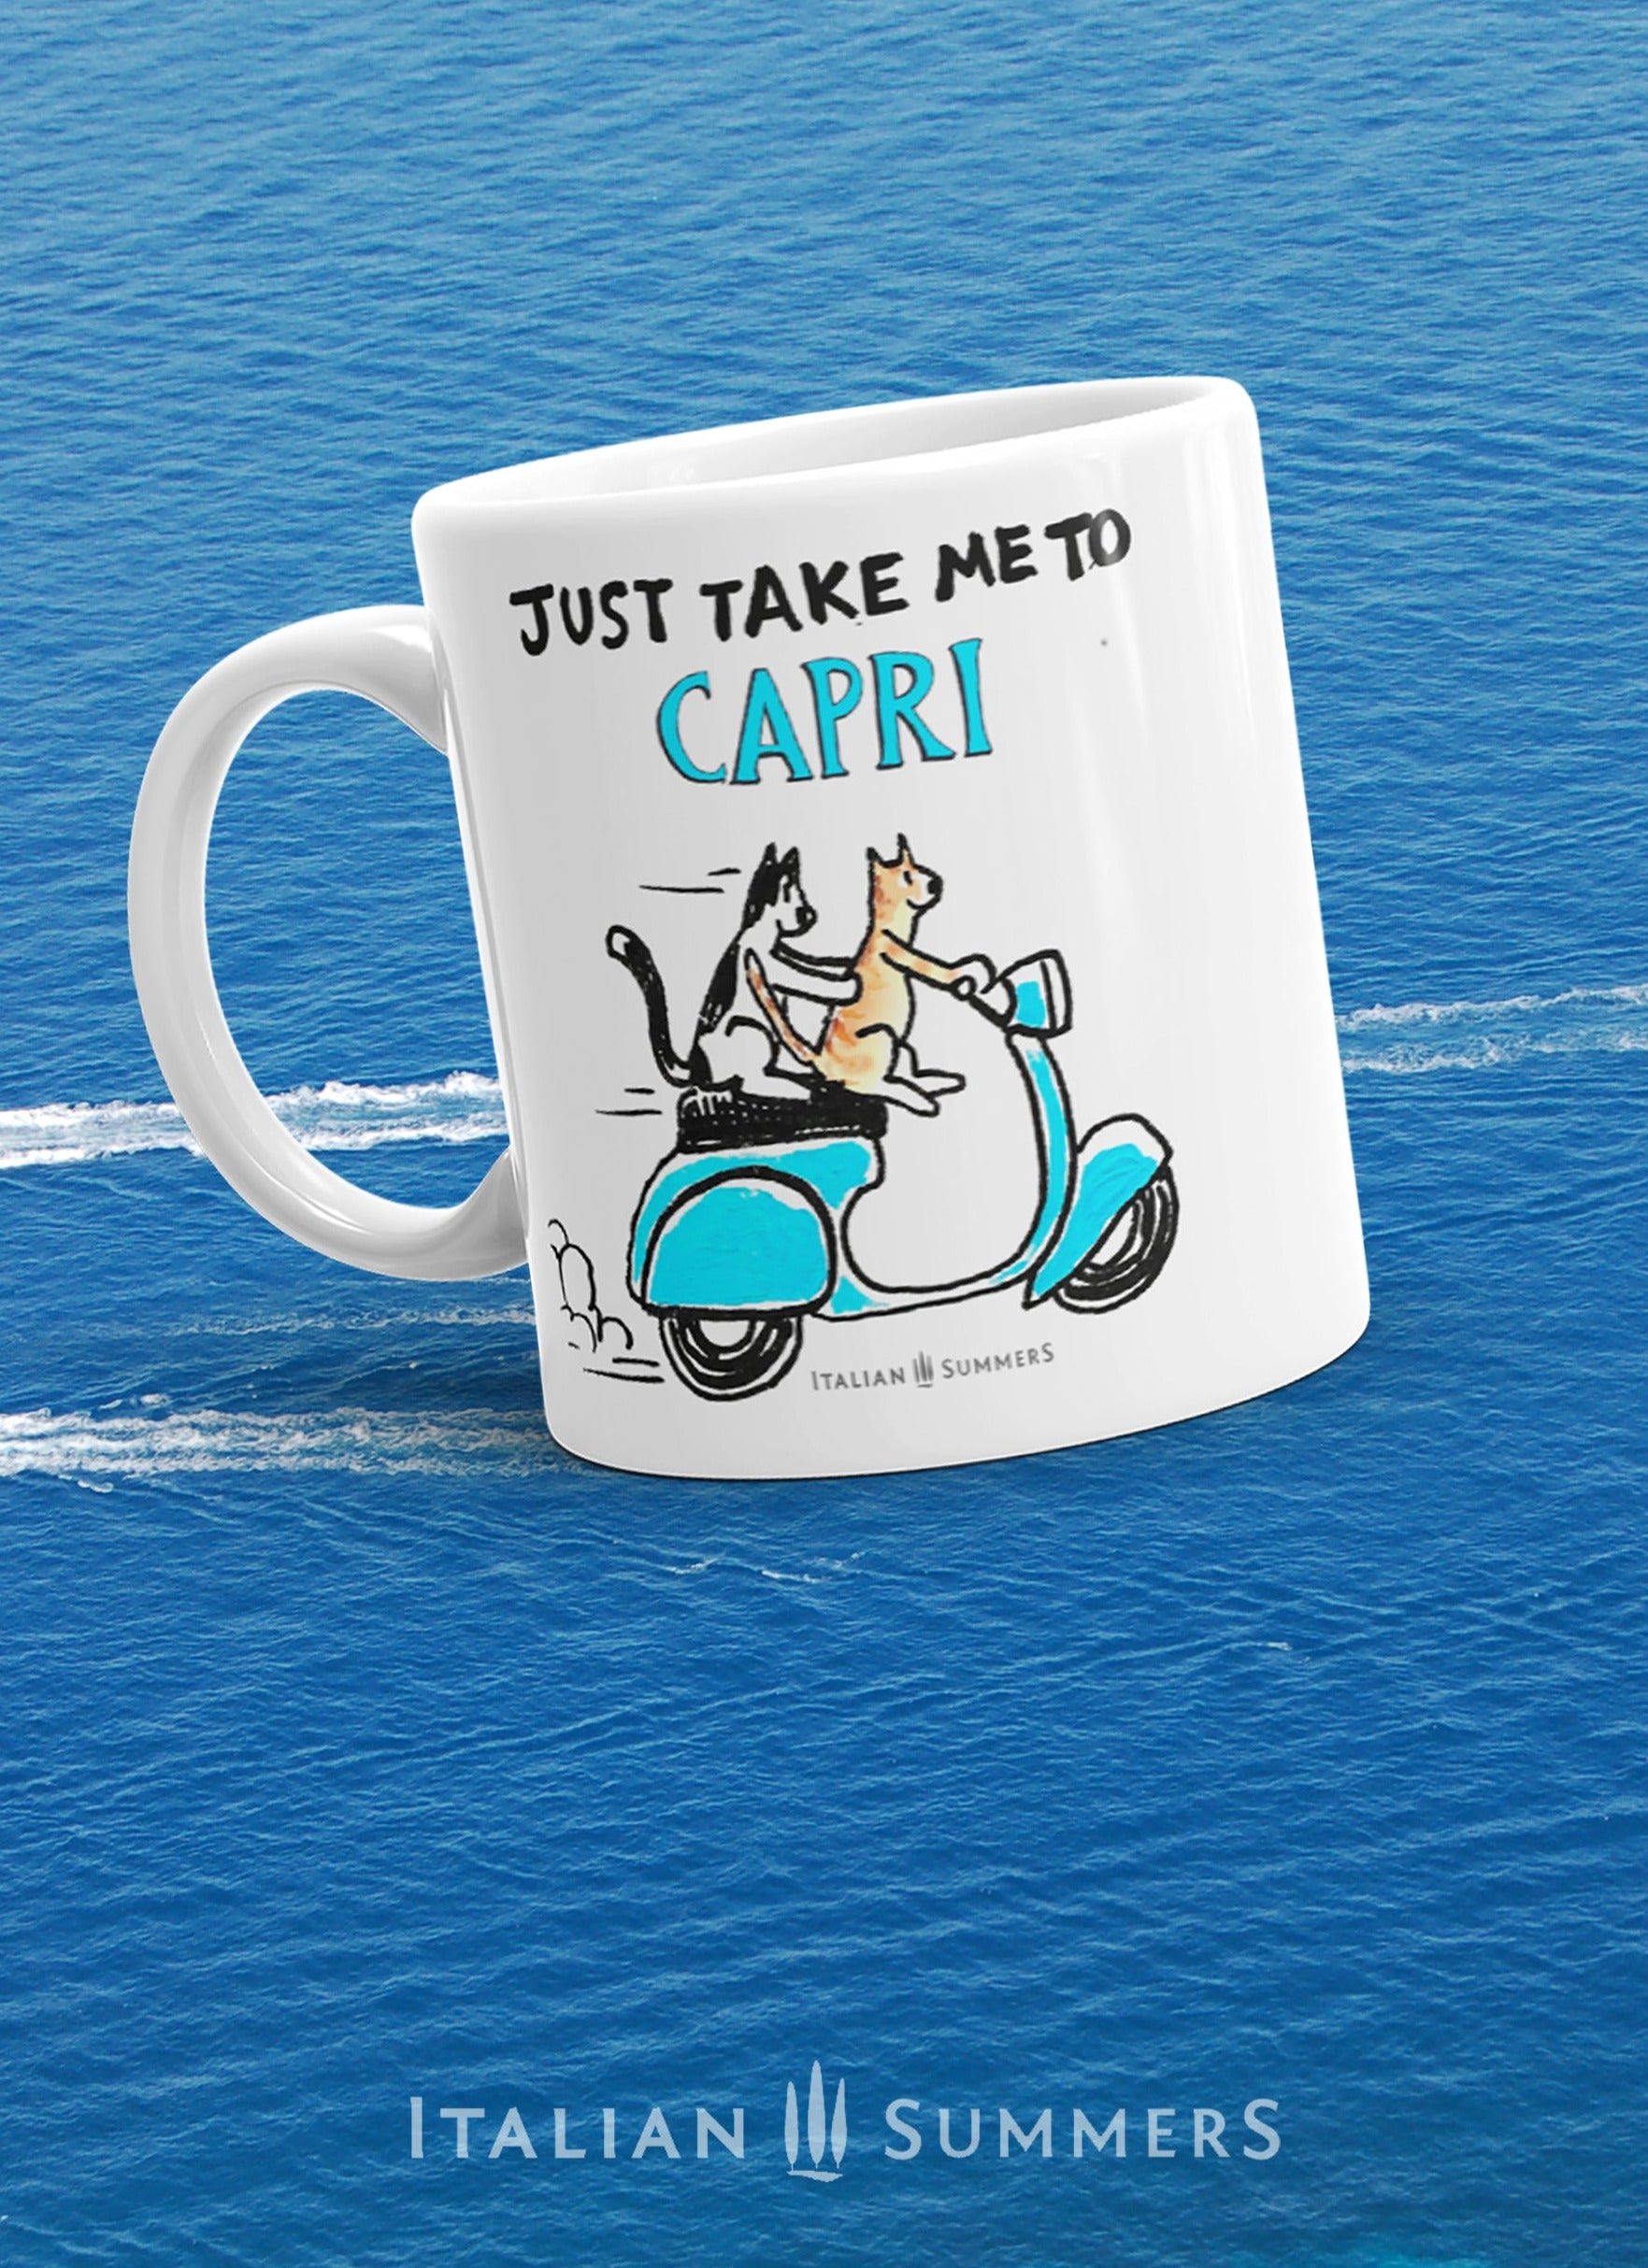 An Italy inspired coffe mug with the text Just take me to Capri. With a sketch of two cats driving an aqua blue vintage Vespa. The mug is avai;able in white or with a yellow or blue inside/handle. Made by Italian Summers